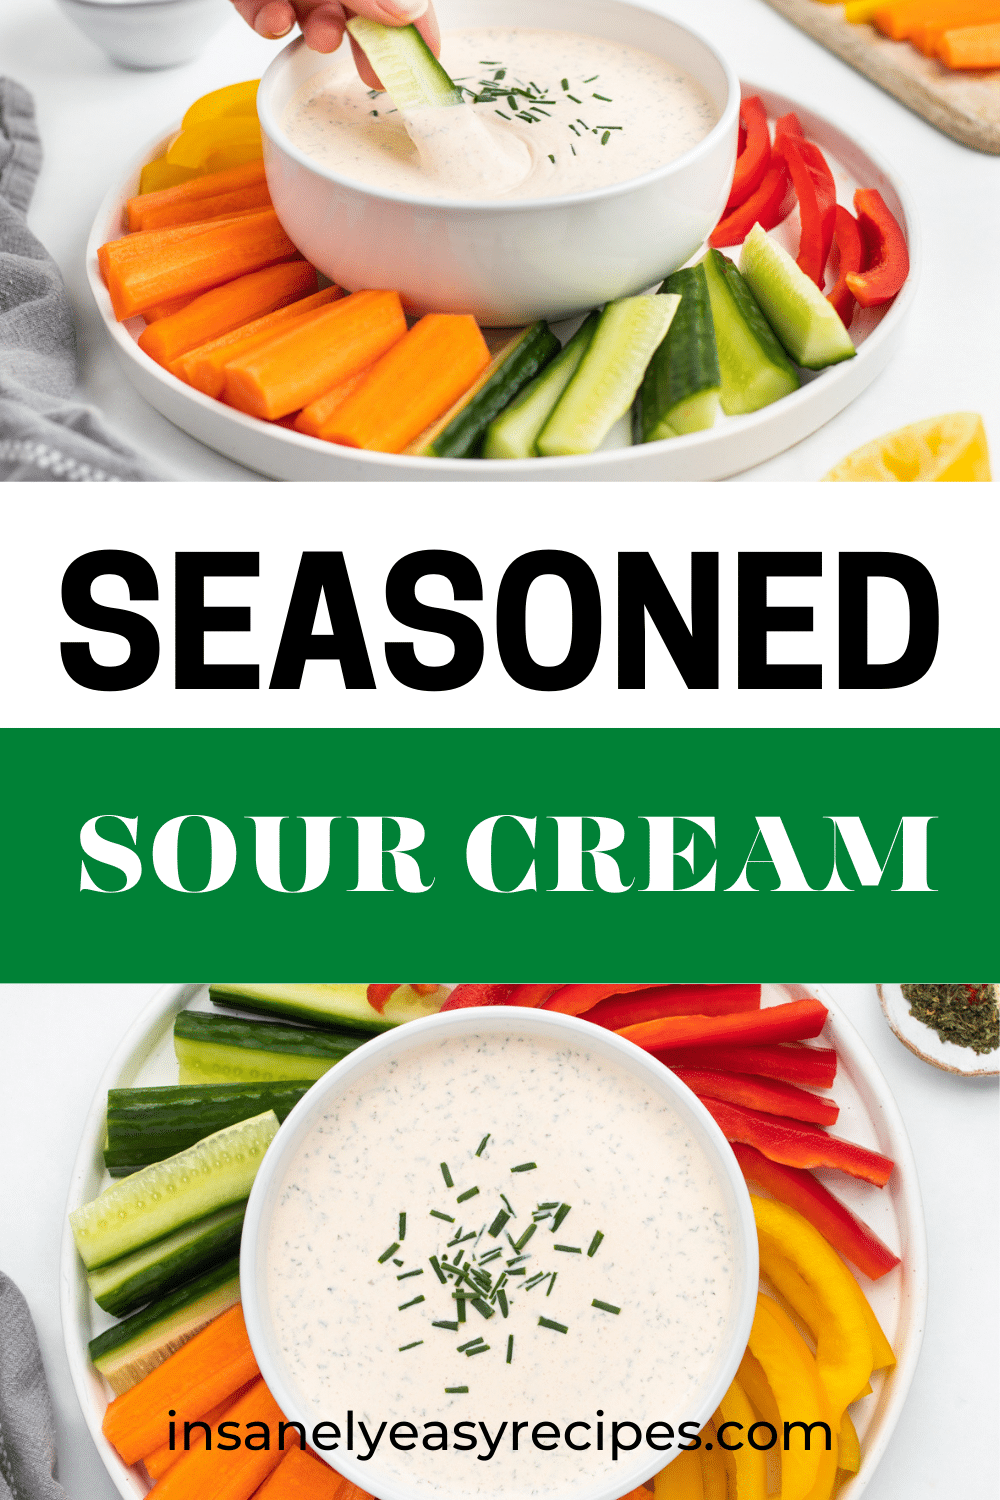 Two photos of a plate of veggies and dip. Text overlay says "seasoned sour cream"